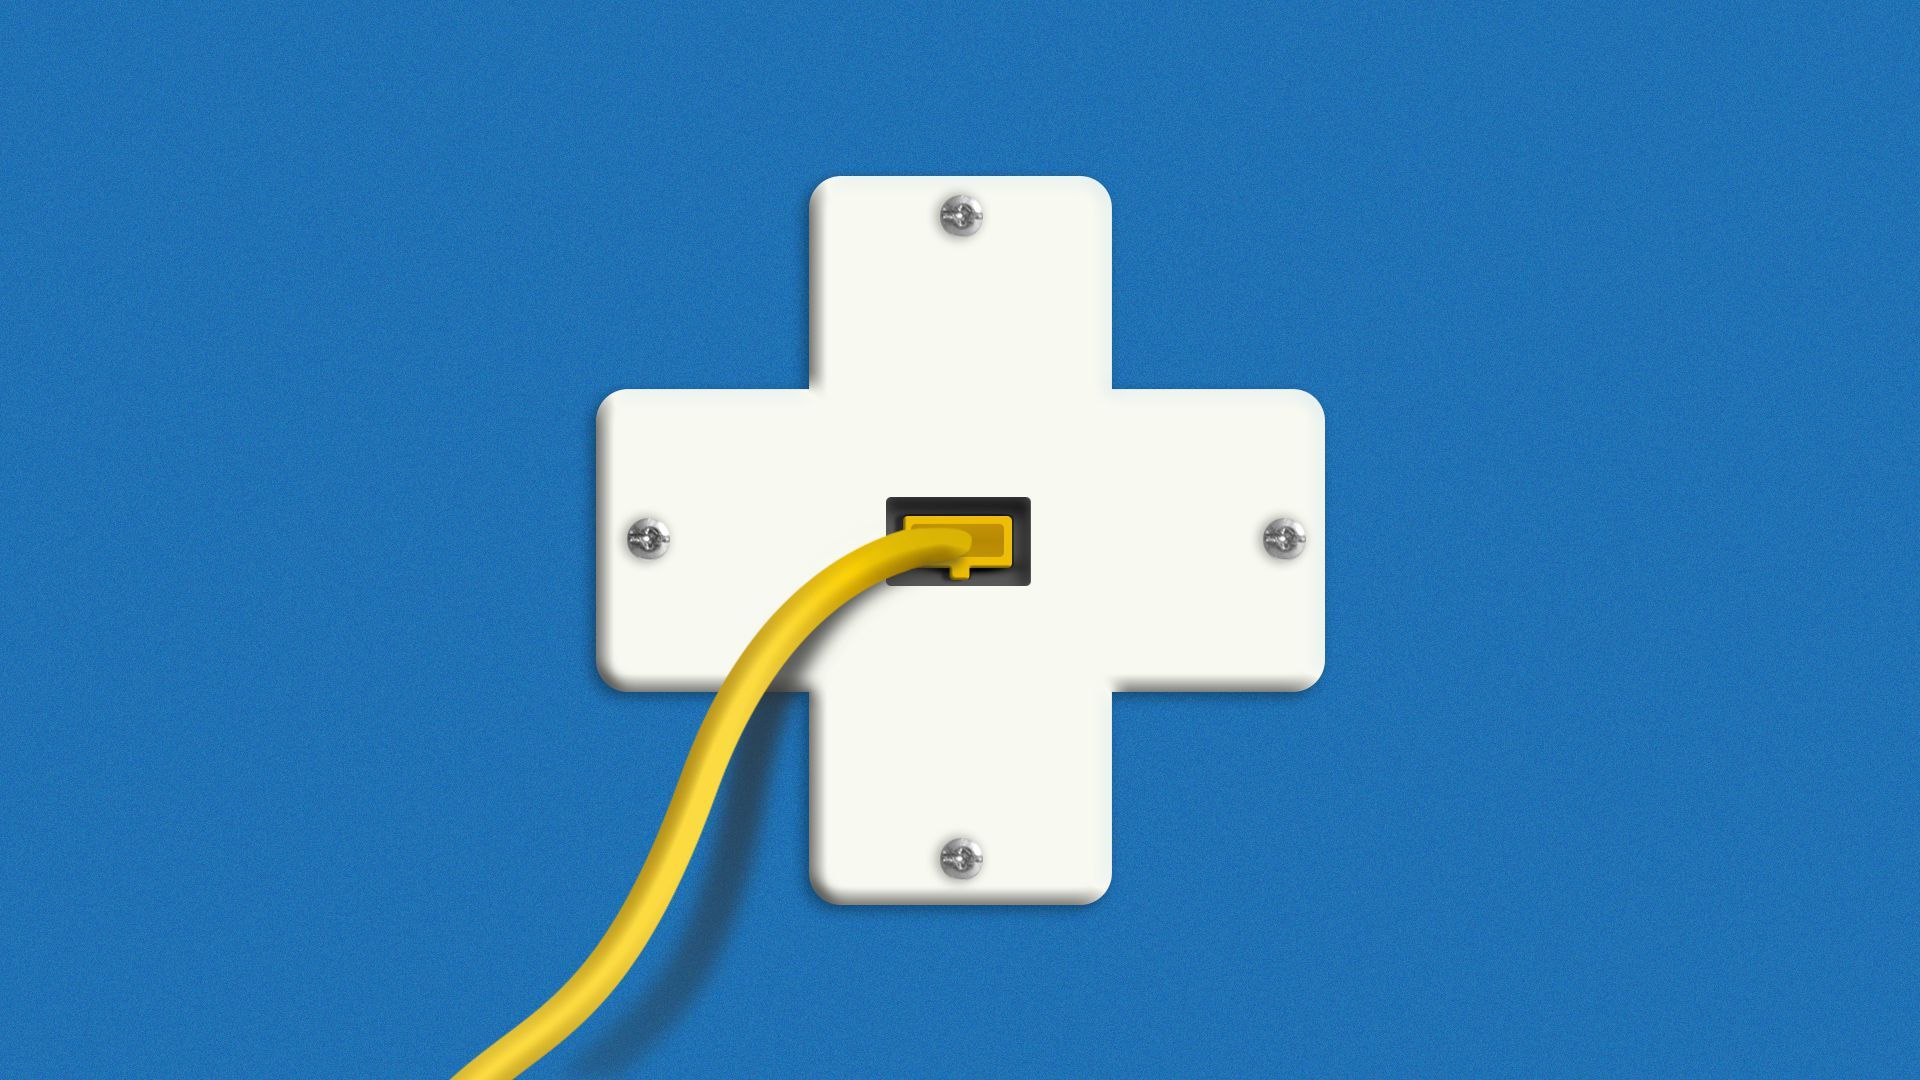 Illustration of an ethernet cable going into a plus sign-shaped wall outlet cover.